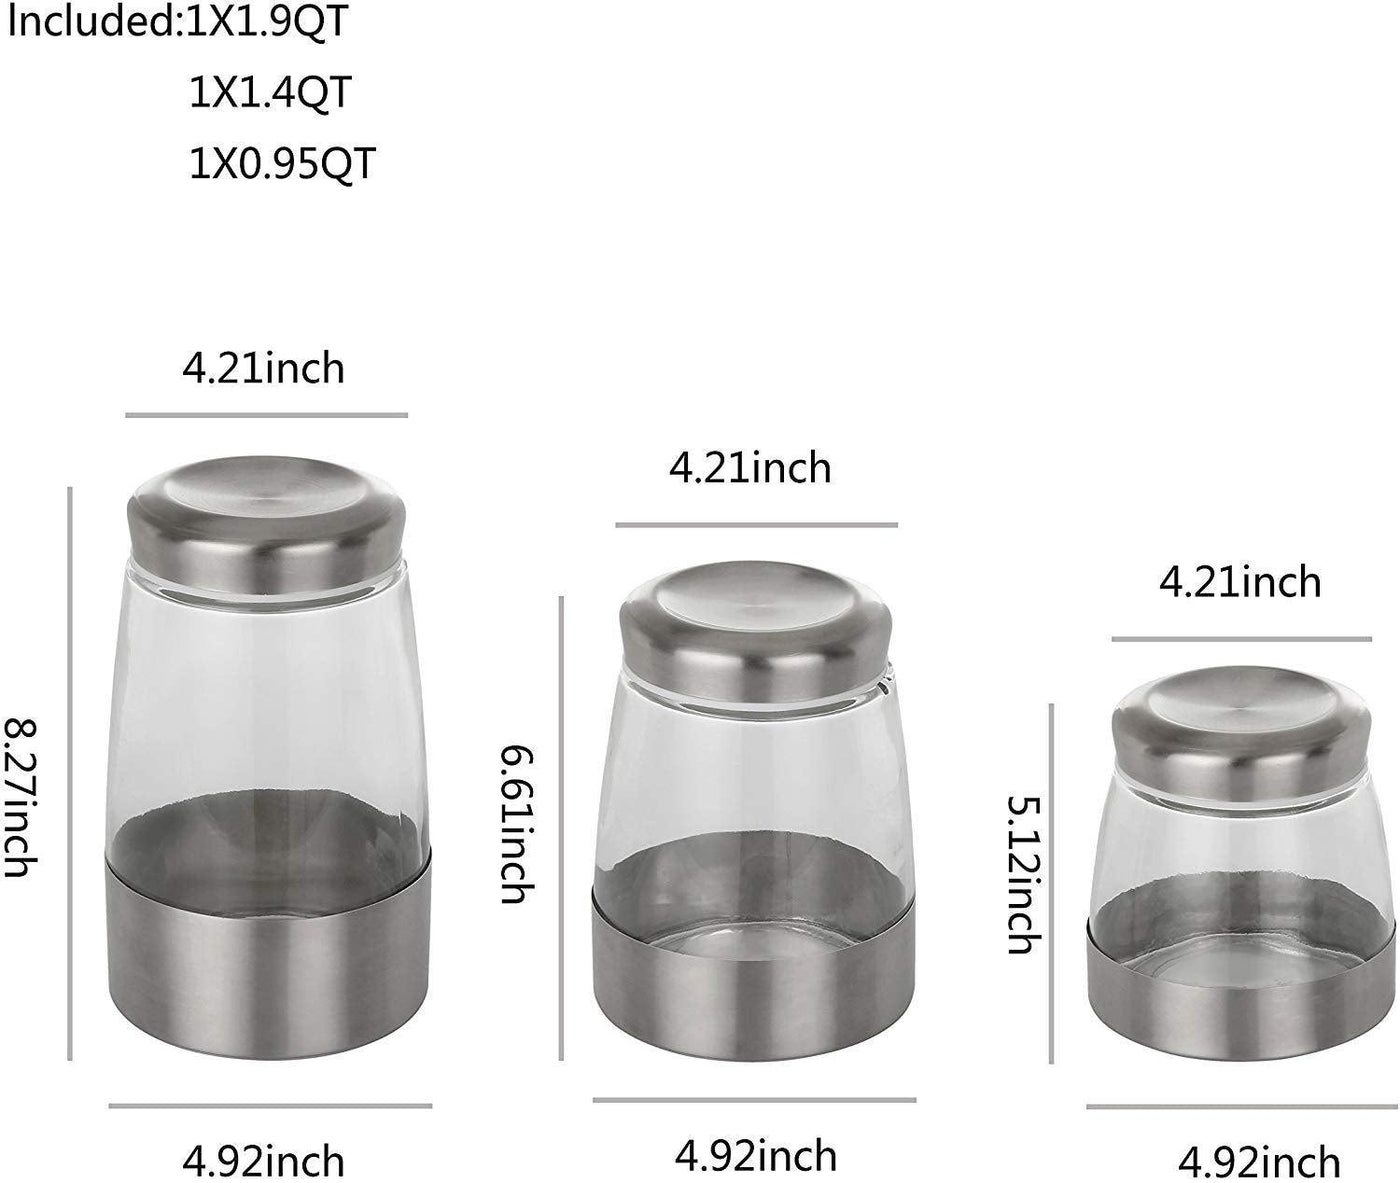 KitchenTrend 3-Piece Glass Food Storage Containers w/ Stainless Steel Lids